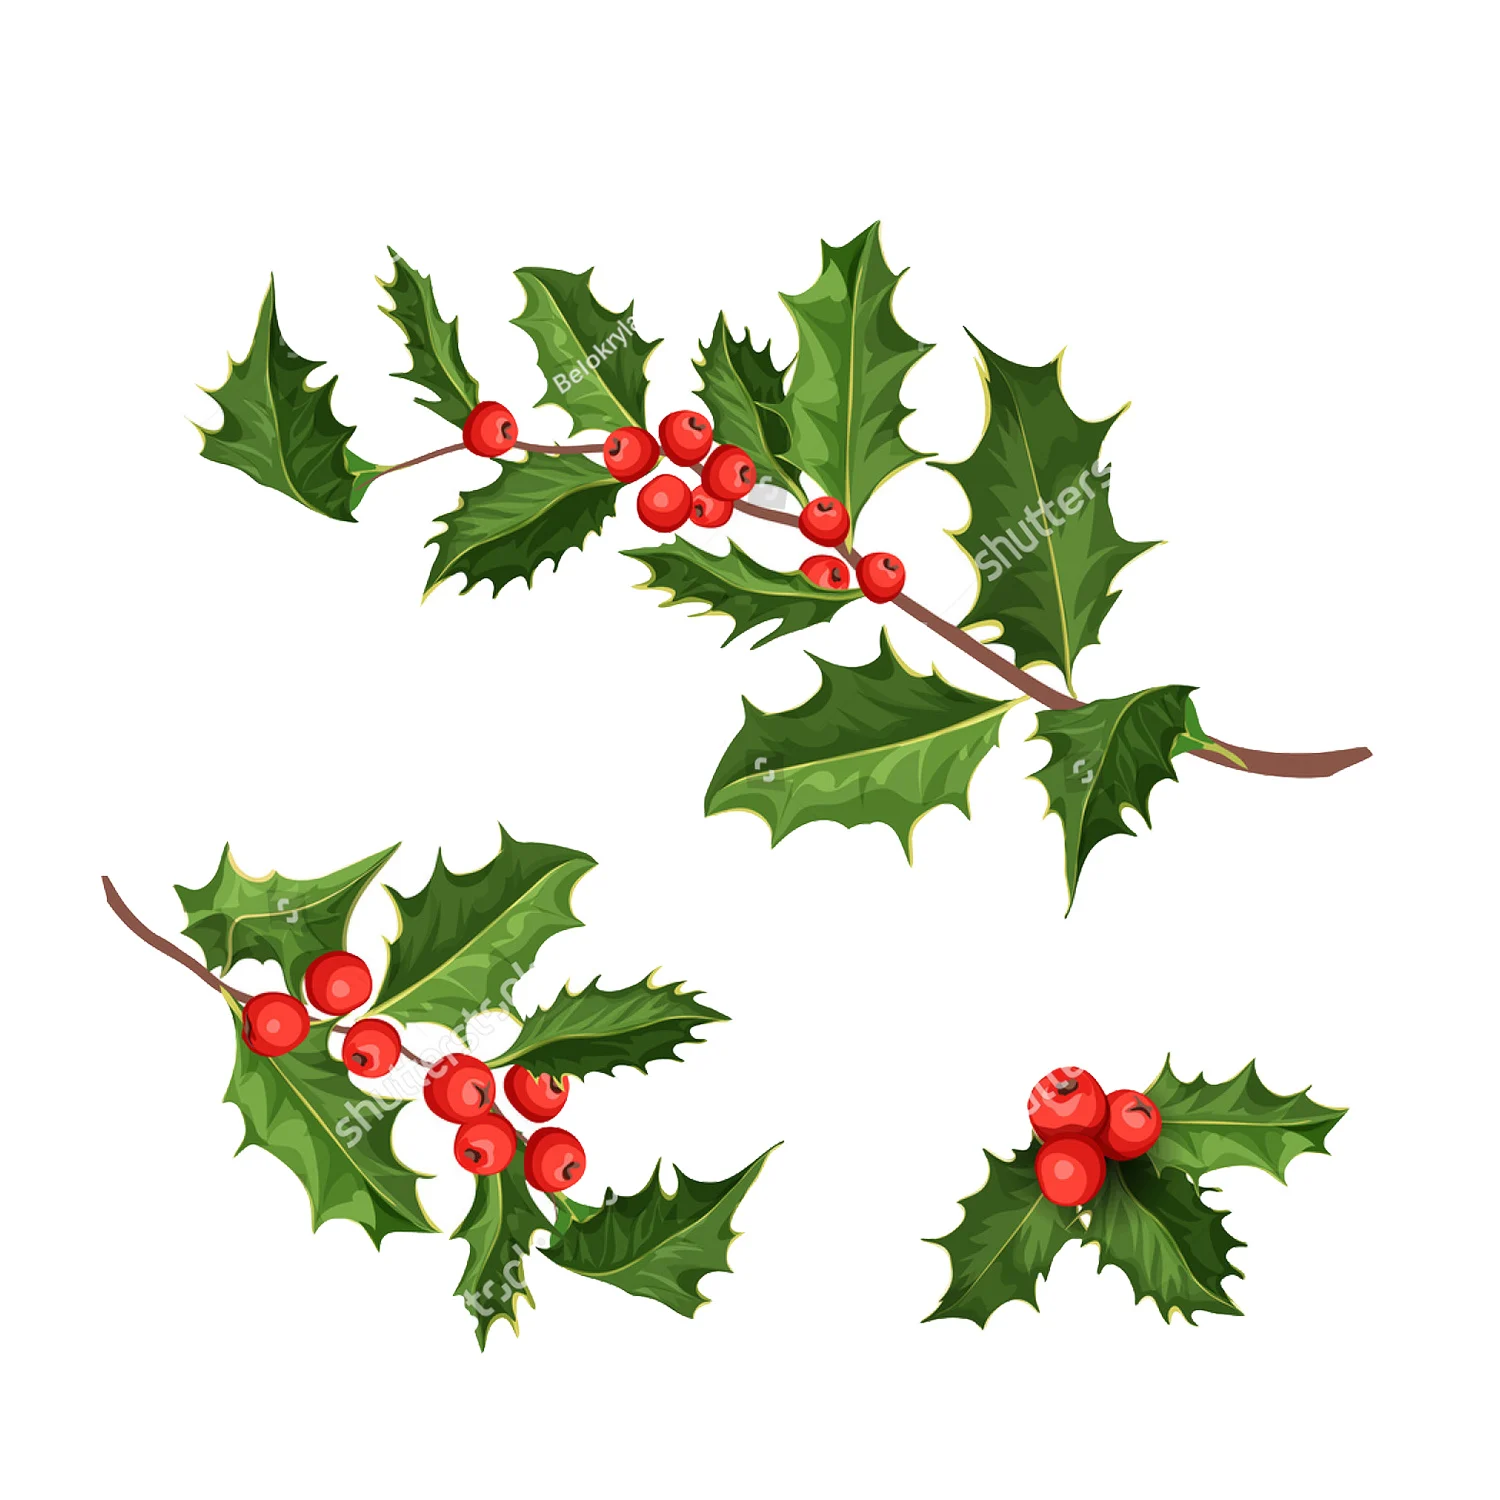 3 Pcs Christmas Holly Cutting Dies New Green Leaves Red Fruits Metal Embossing Stencil For Scrapbook Card Craft Decoration